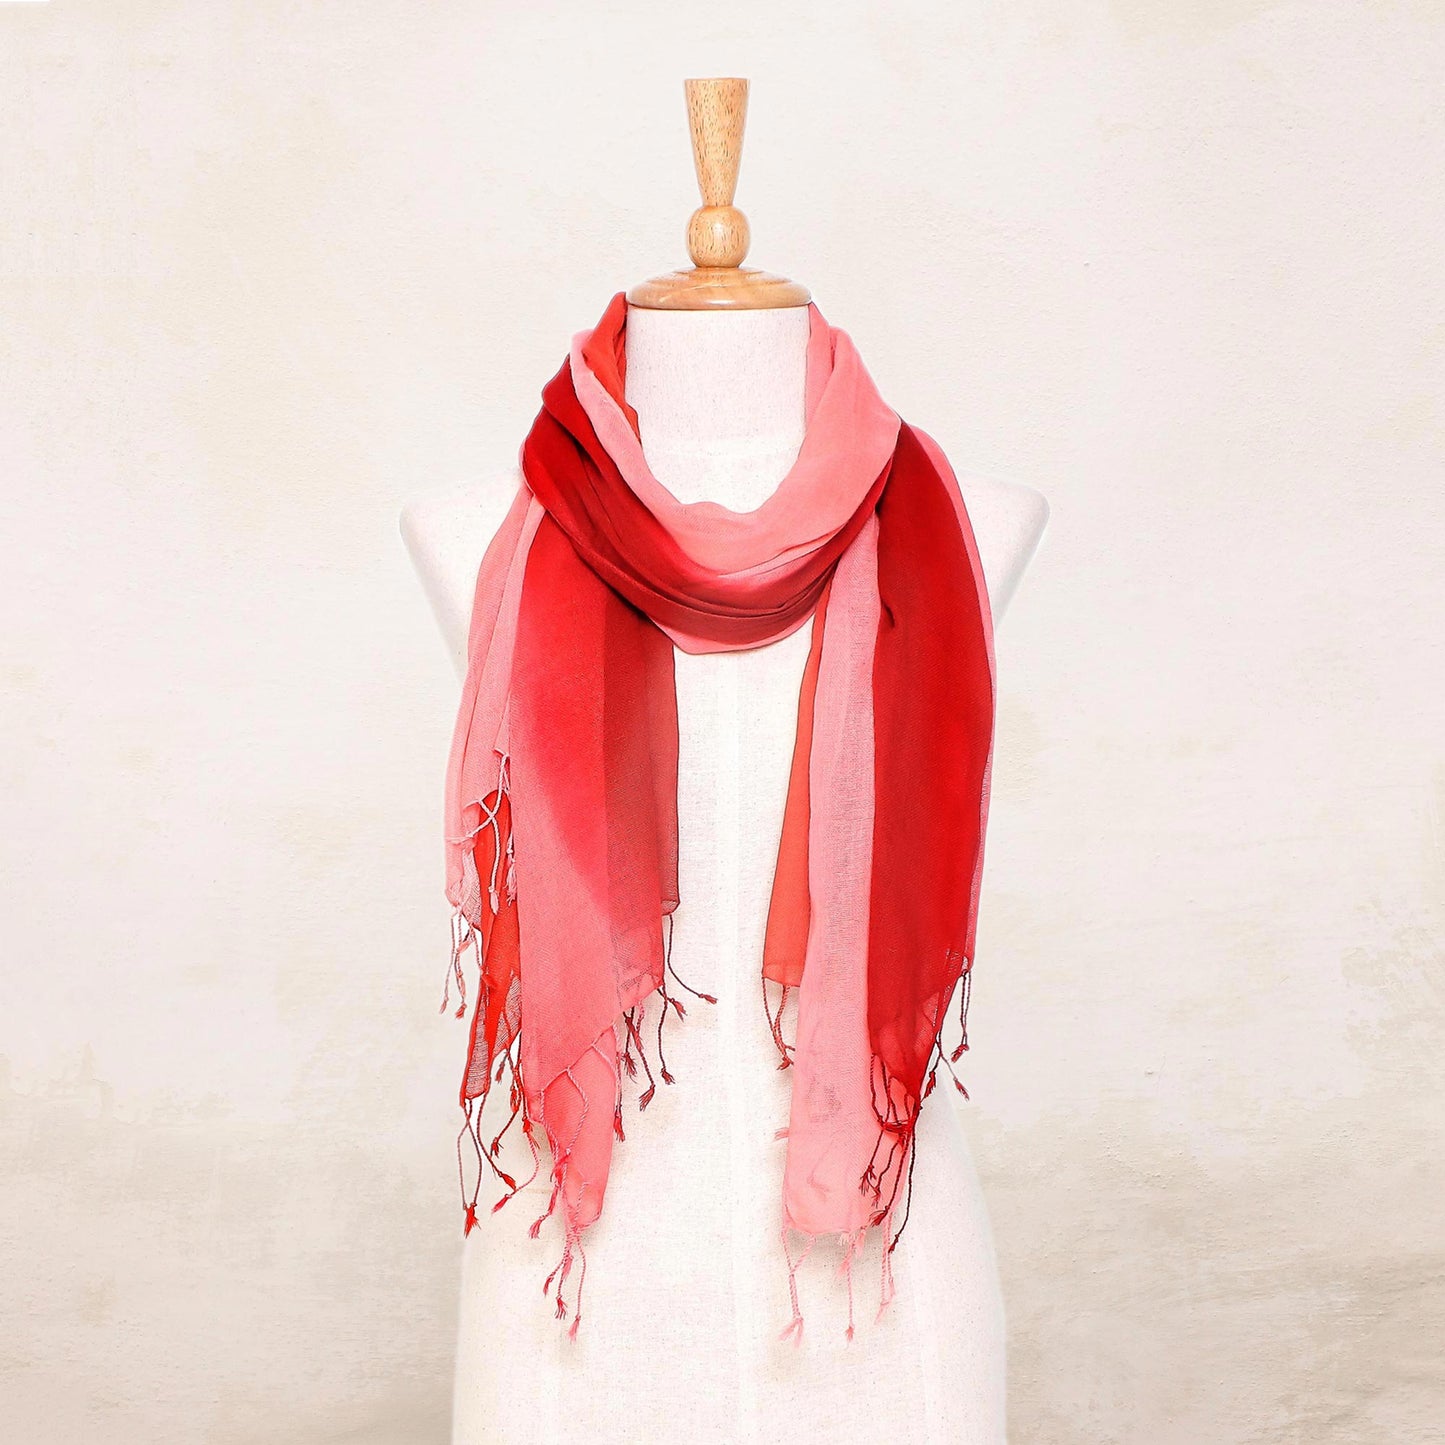 Delightful Breeze in Red Cotton Wrap Scarves in Red Pink and Orange (Pair)